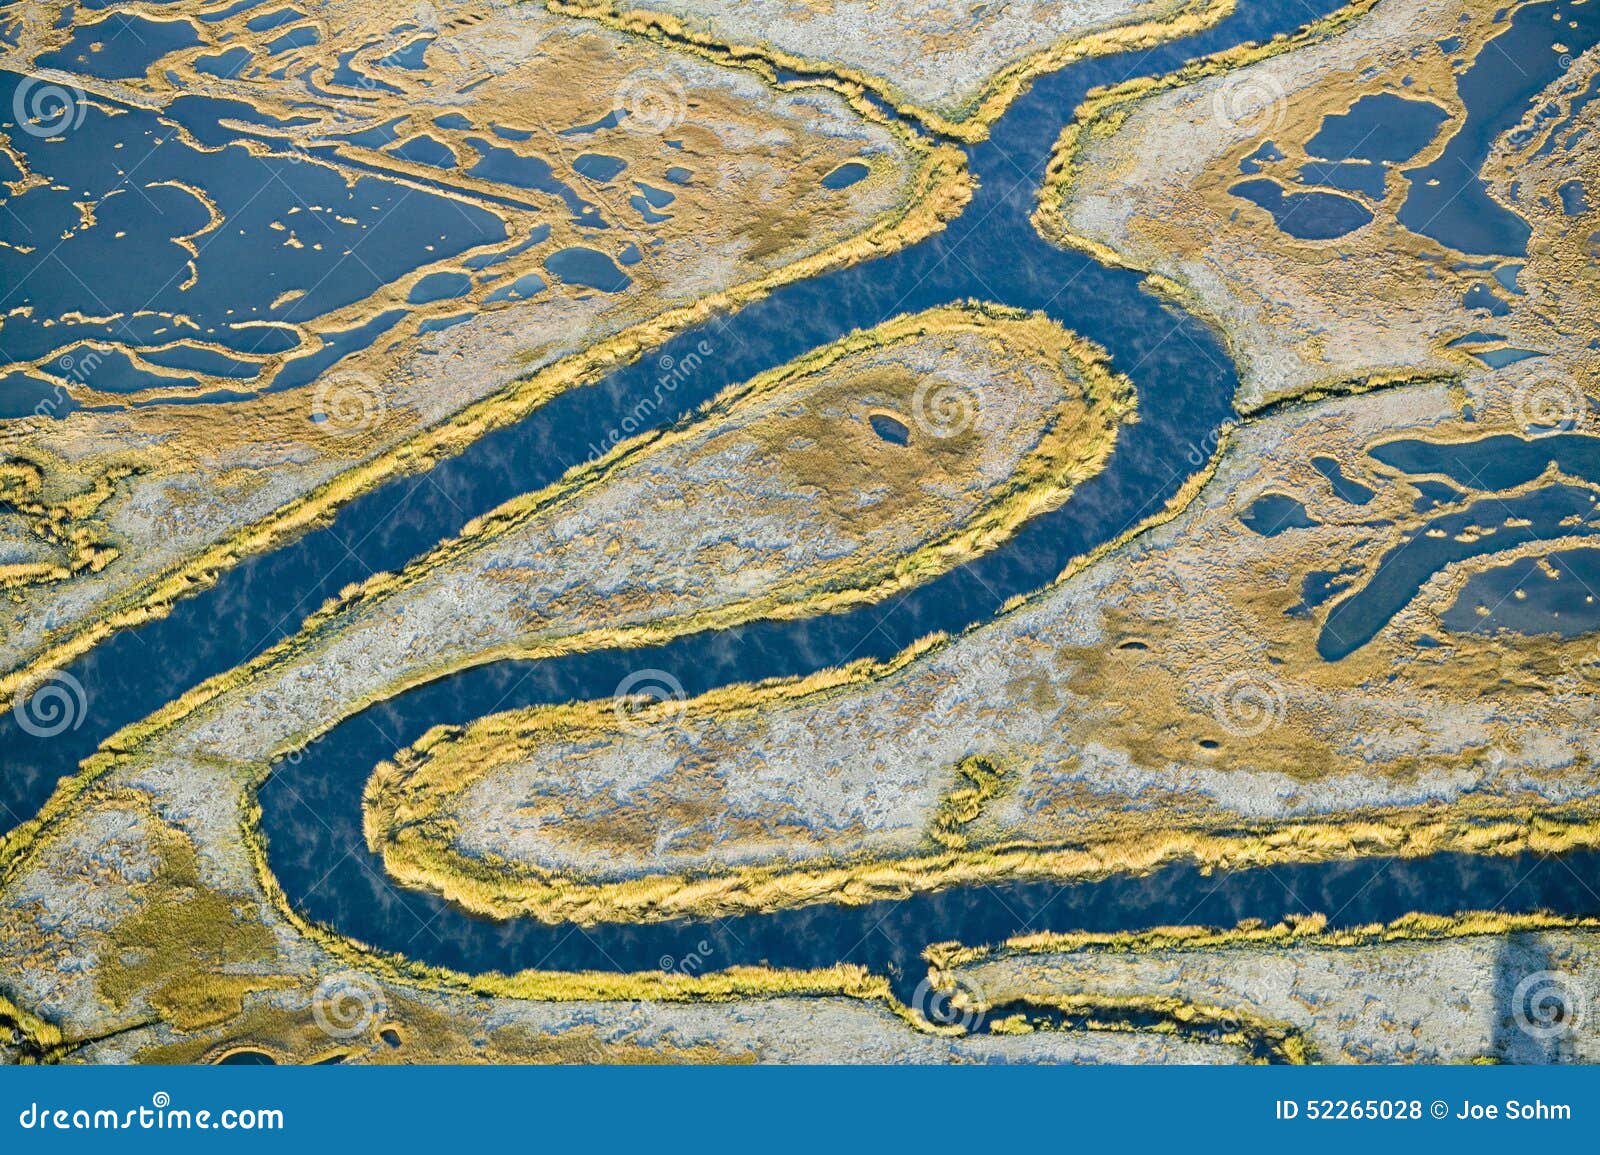 aerial view of marsh, wetland abstraction of salt and seawater, and rachel carson wildlife sanctuary in wells, maine